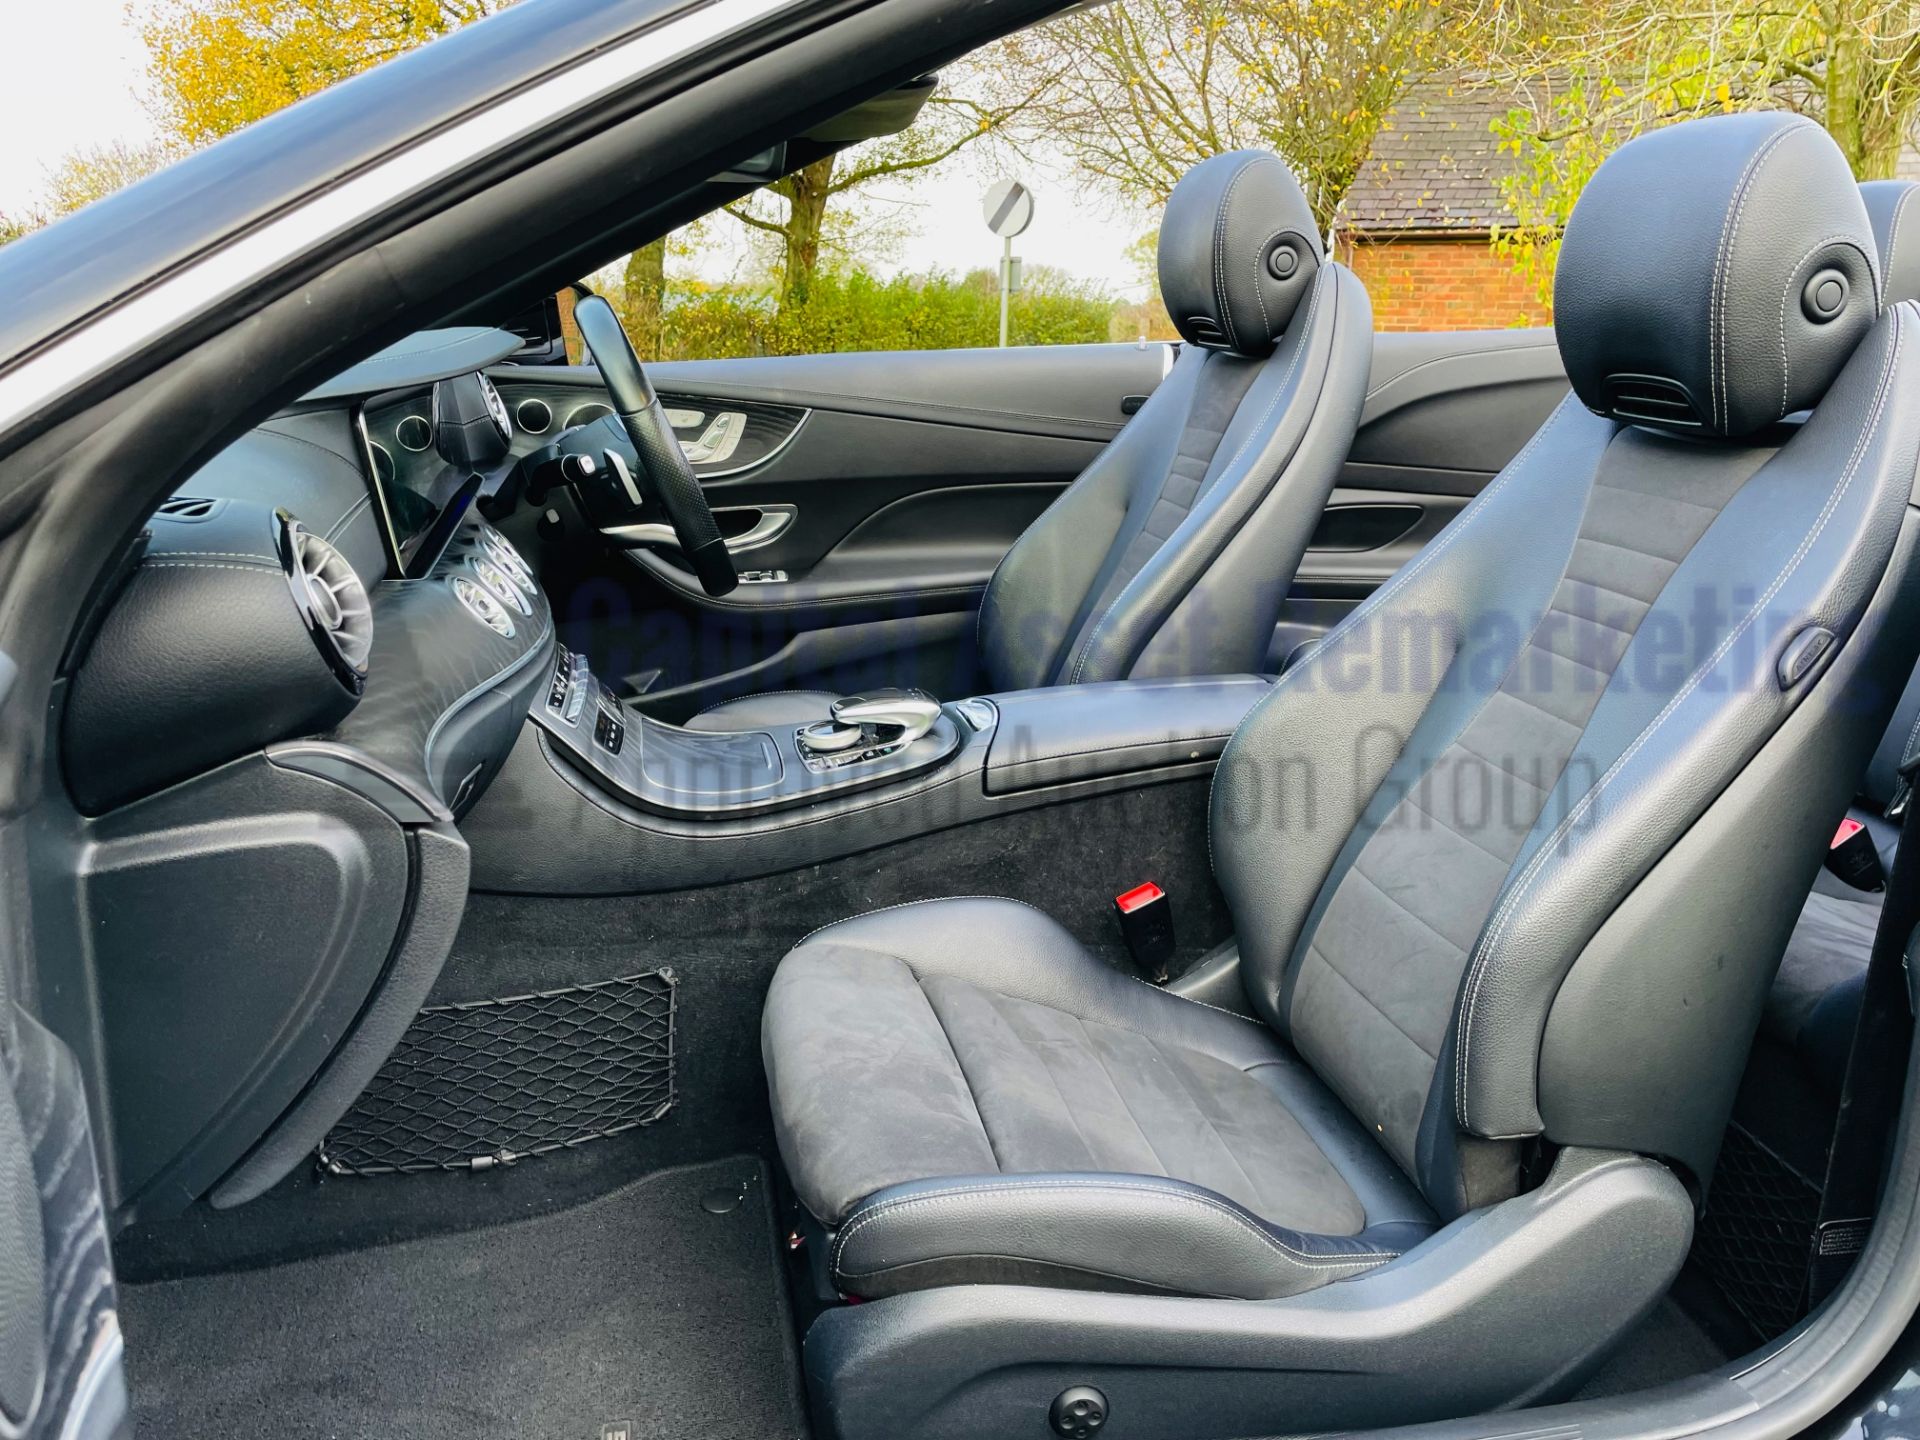 MERCEDES-BENZ E220D *AMG LINE - CABRIOLET* (2019 - EURO 6) '9G TRONIC AUTO - SAT NAV' *FULLY LOADED* - Image 41 of 66